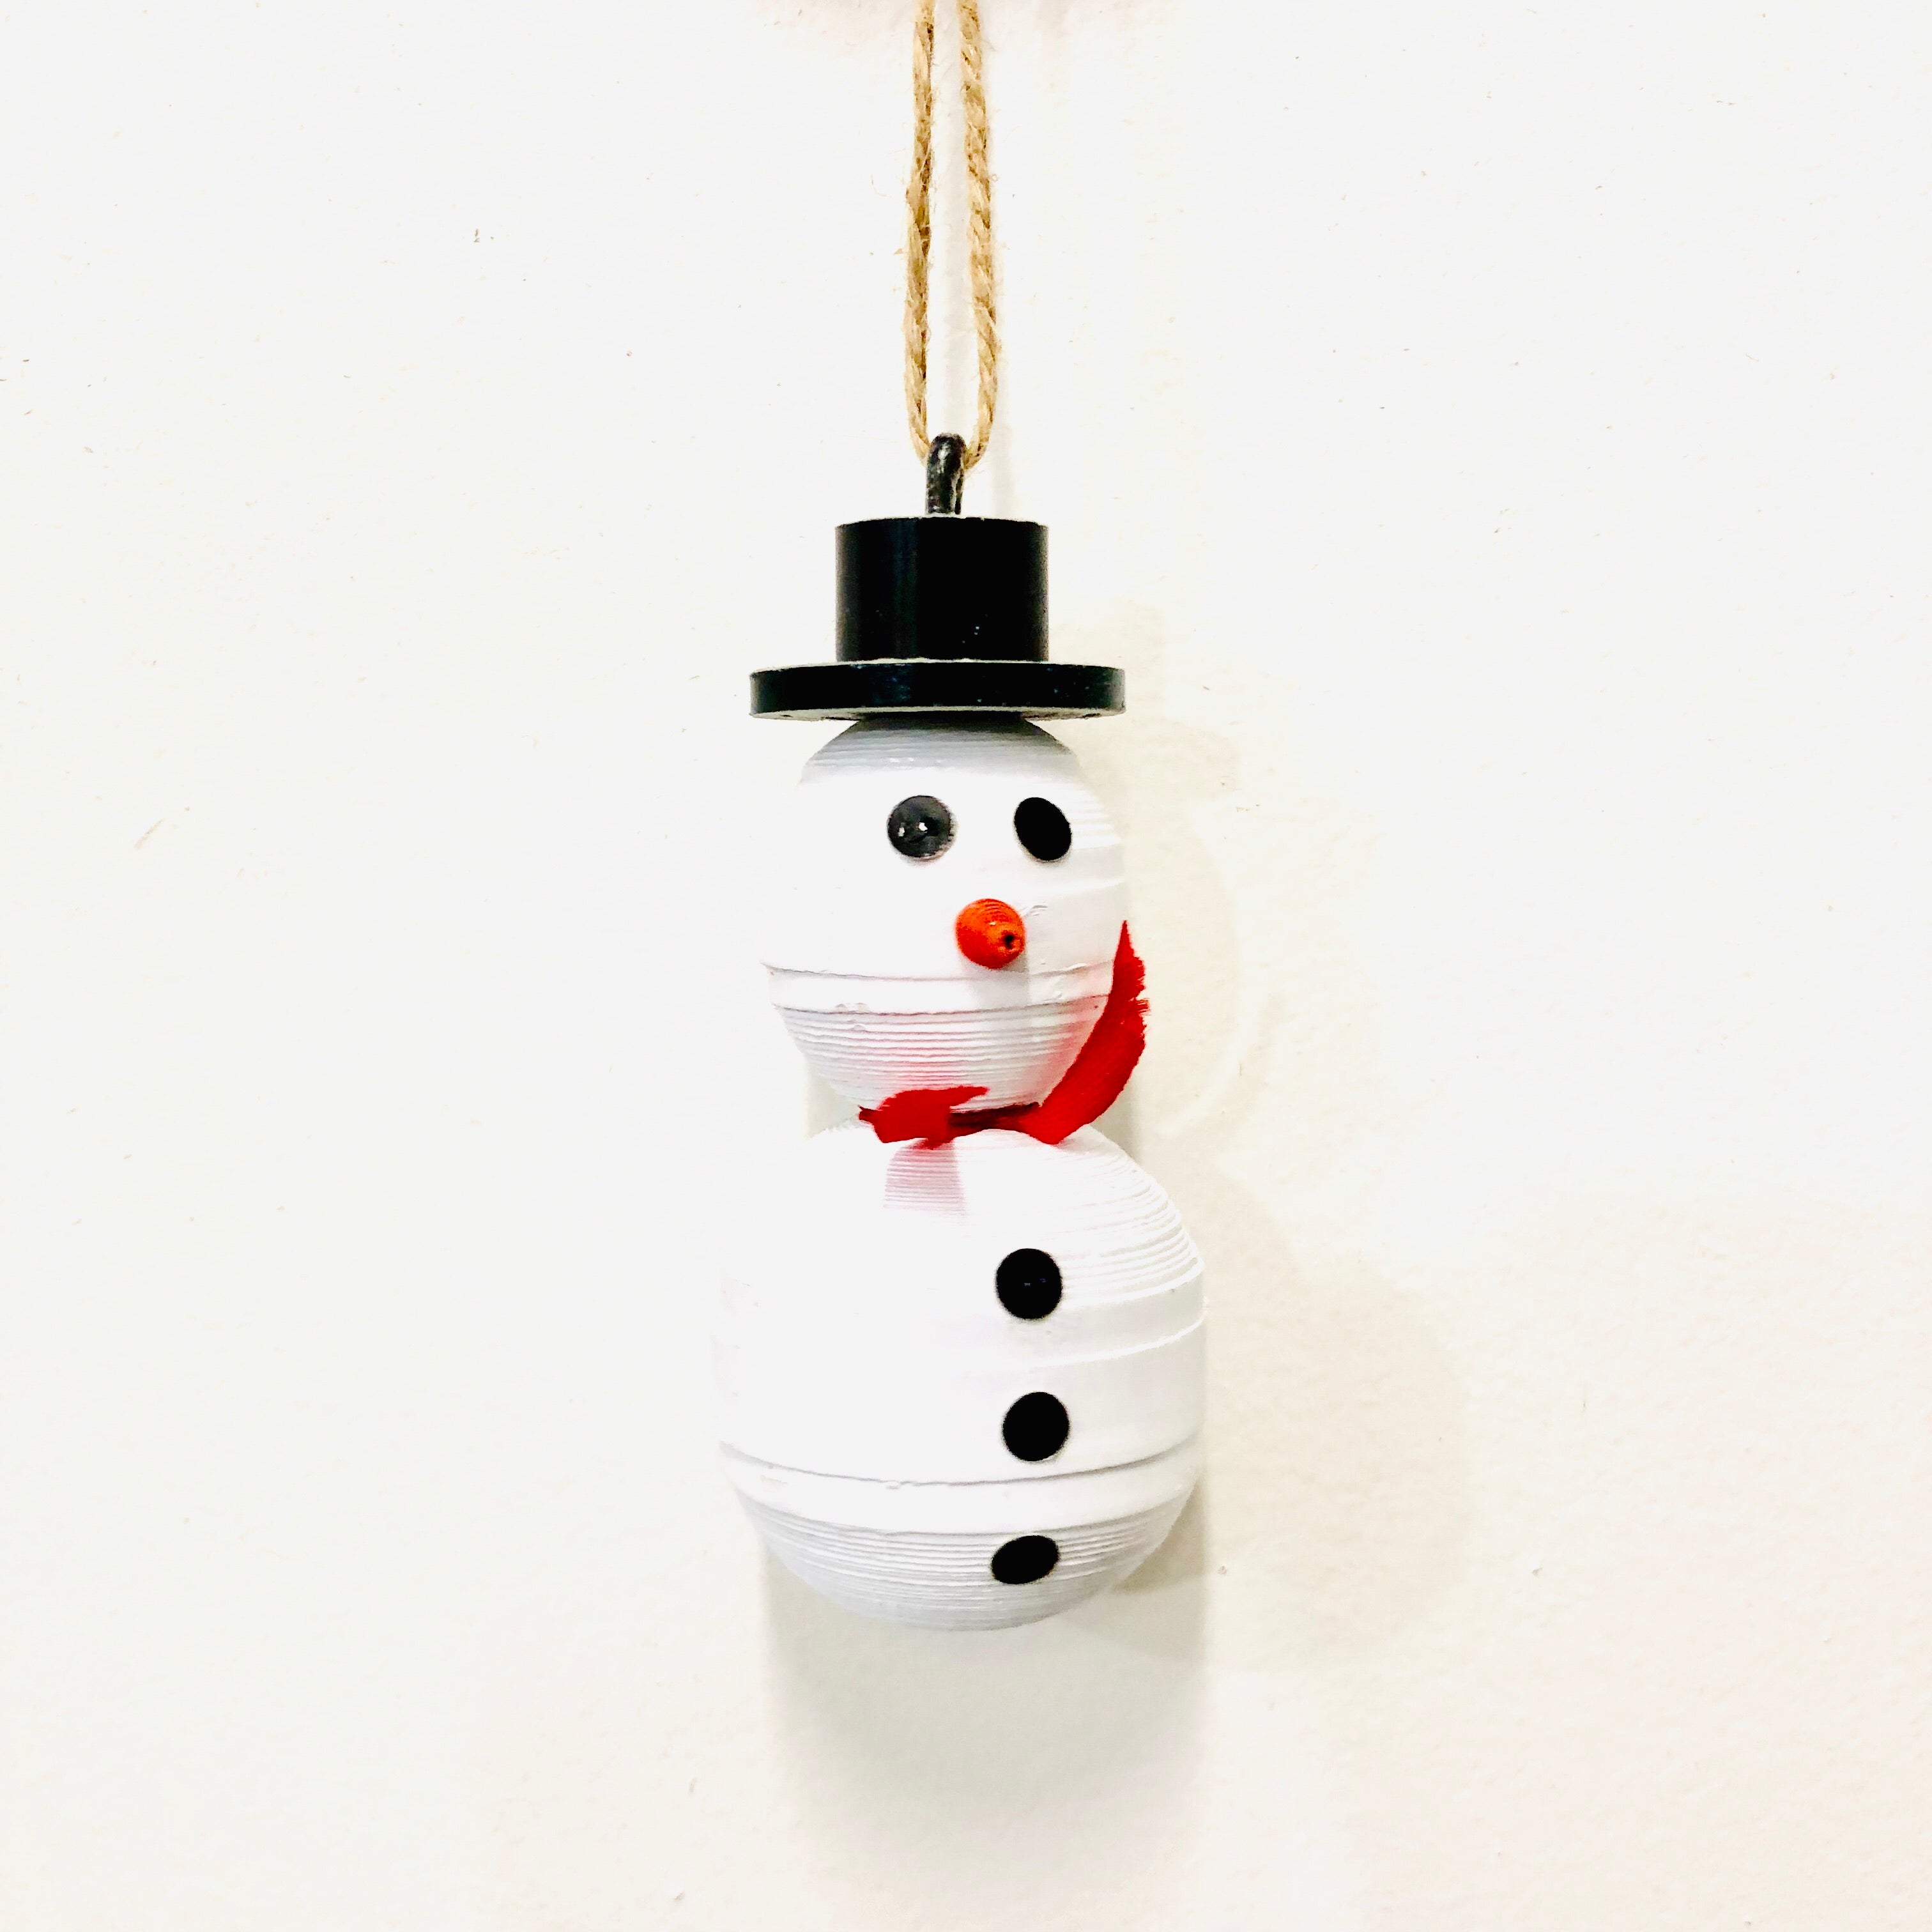 Wholesale snowman kit For Defining Your Christmas 